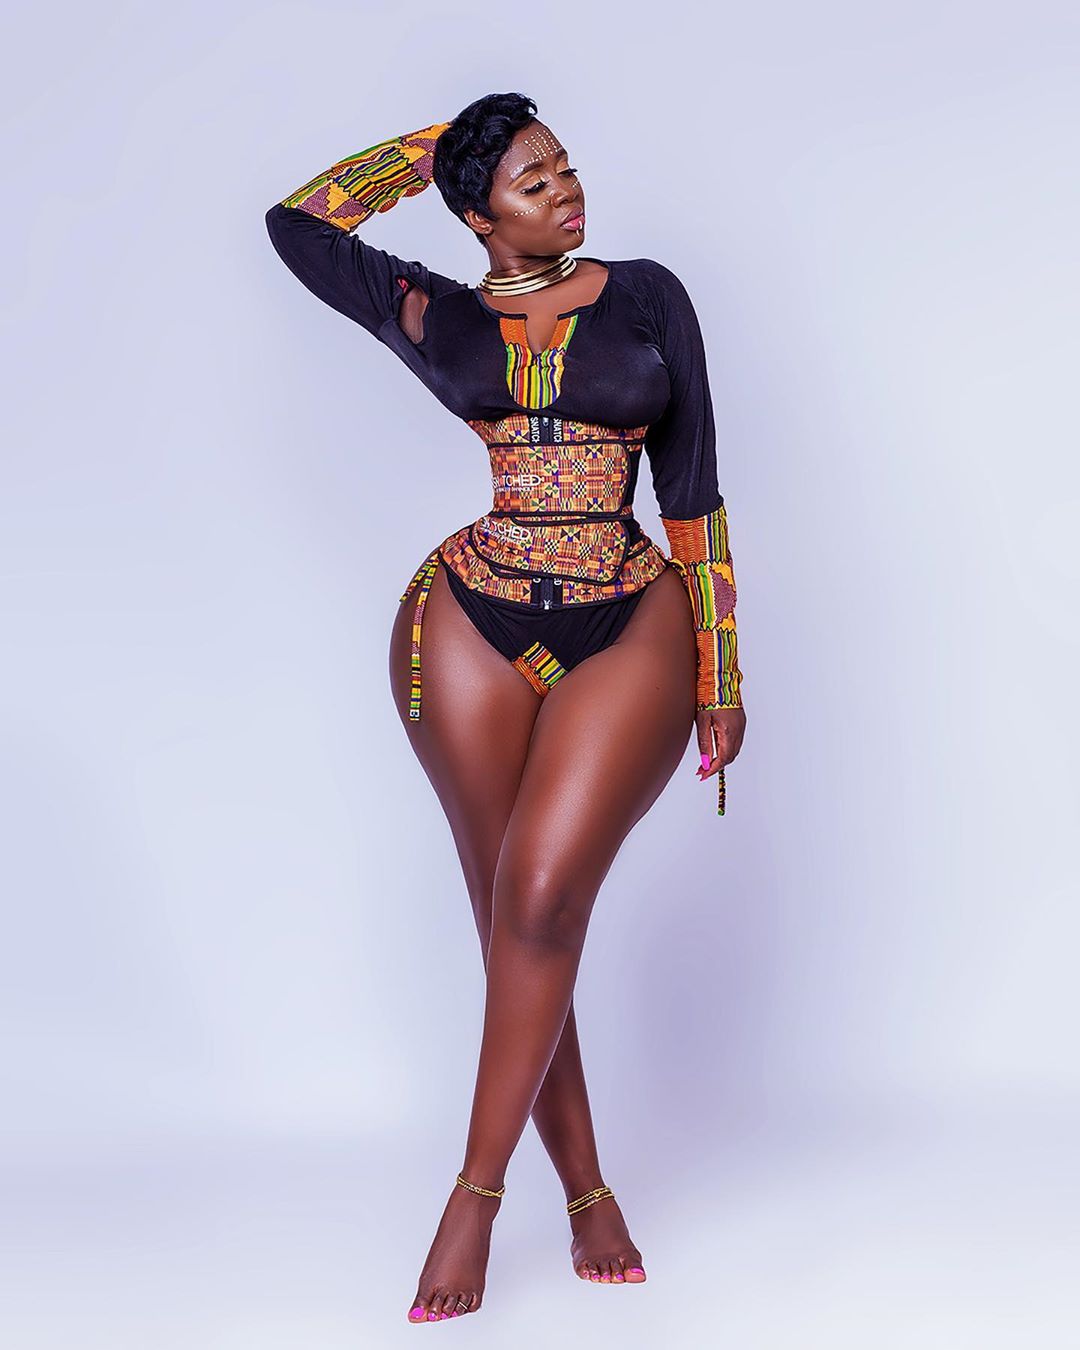 Princess Shyngle advertise waist trainer with her sexy curve